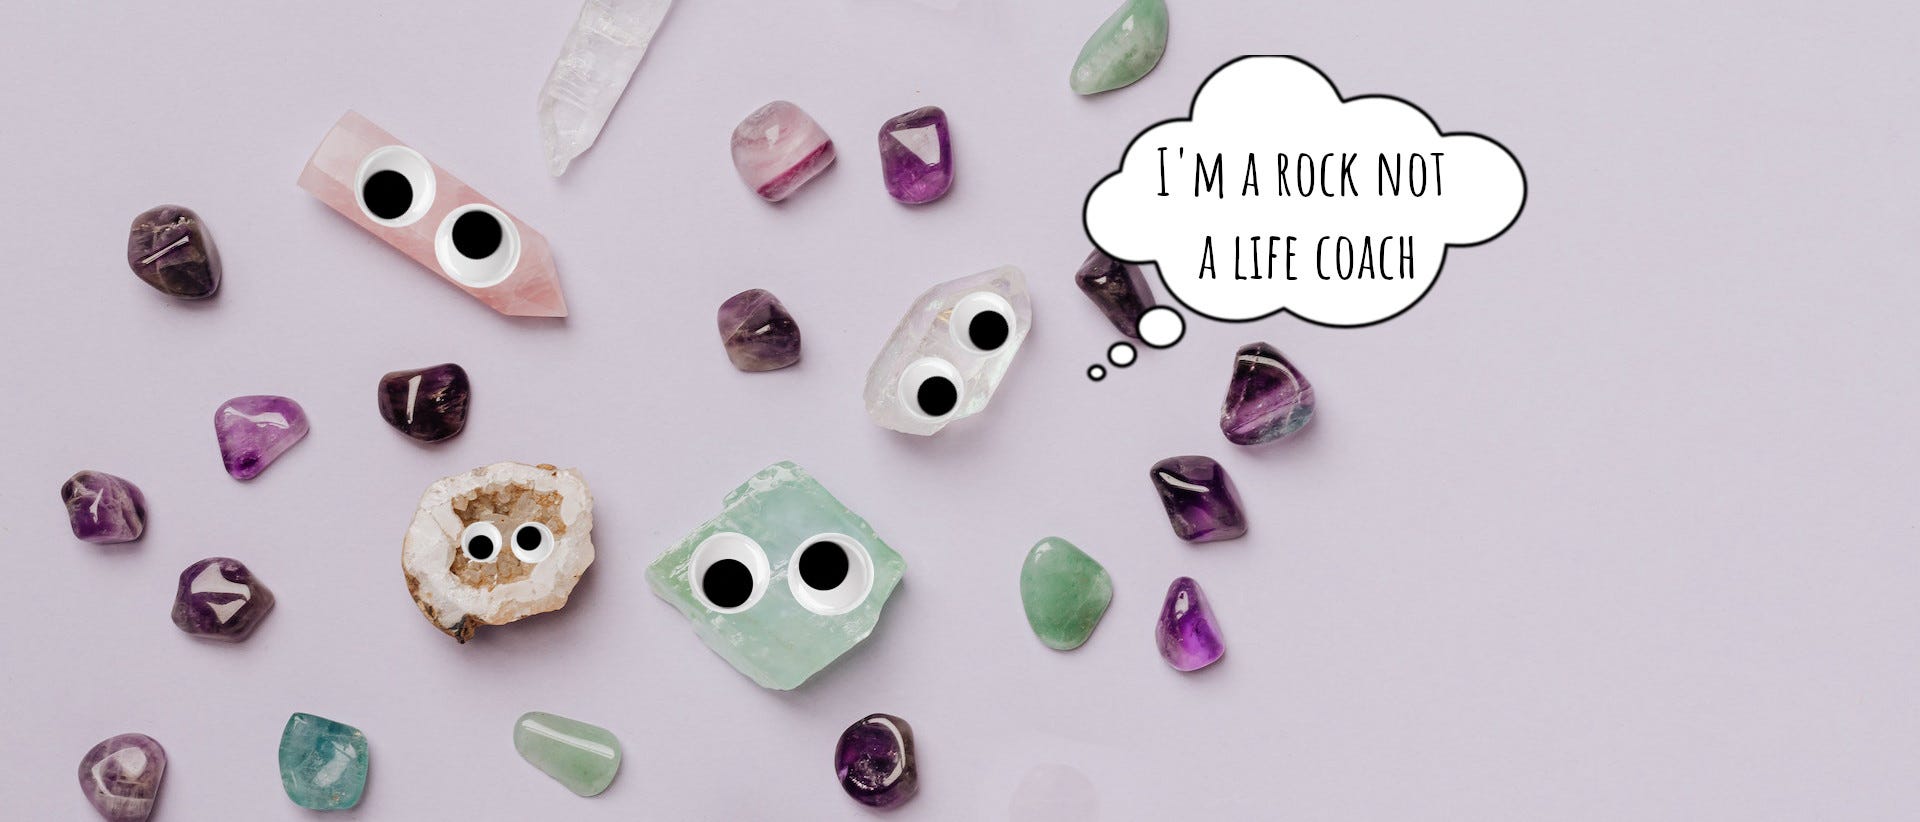 Our Top 10 Favorite Mineral/Rock/Gem Memes - Where to Find Rocks